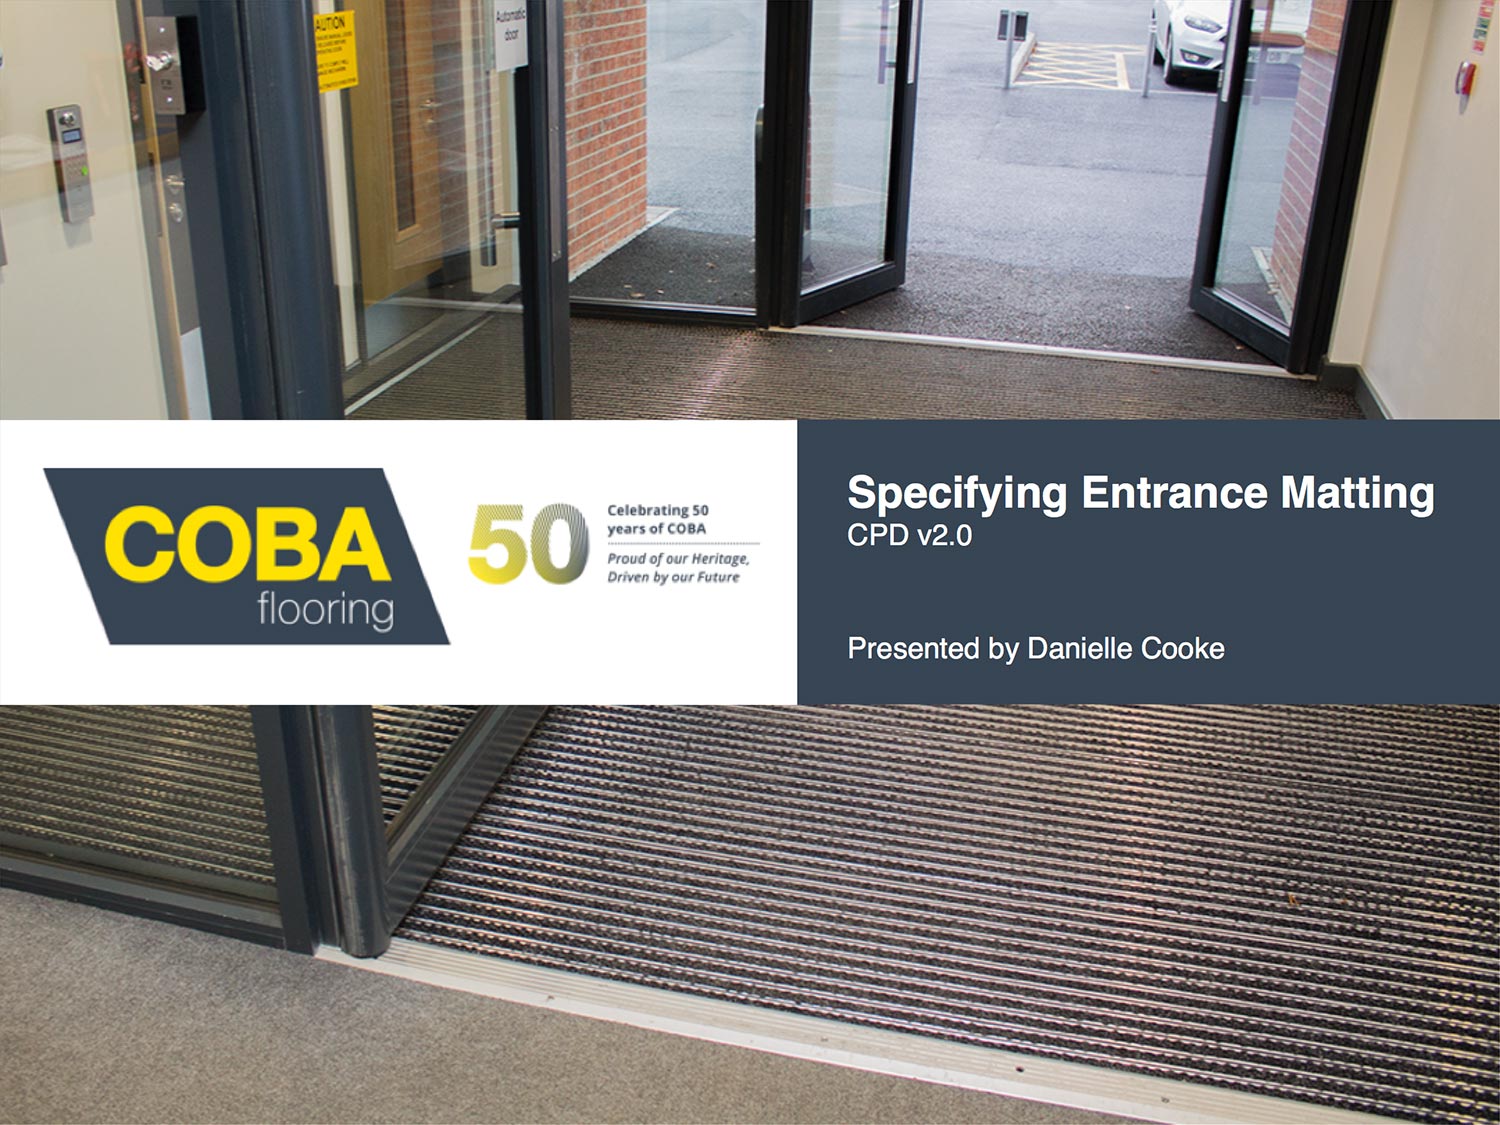 CPD specifying entrance matting